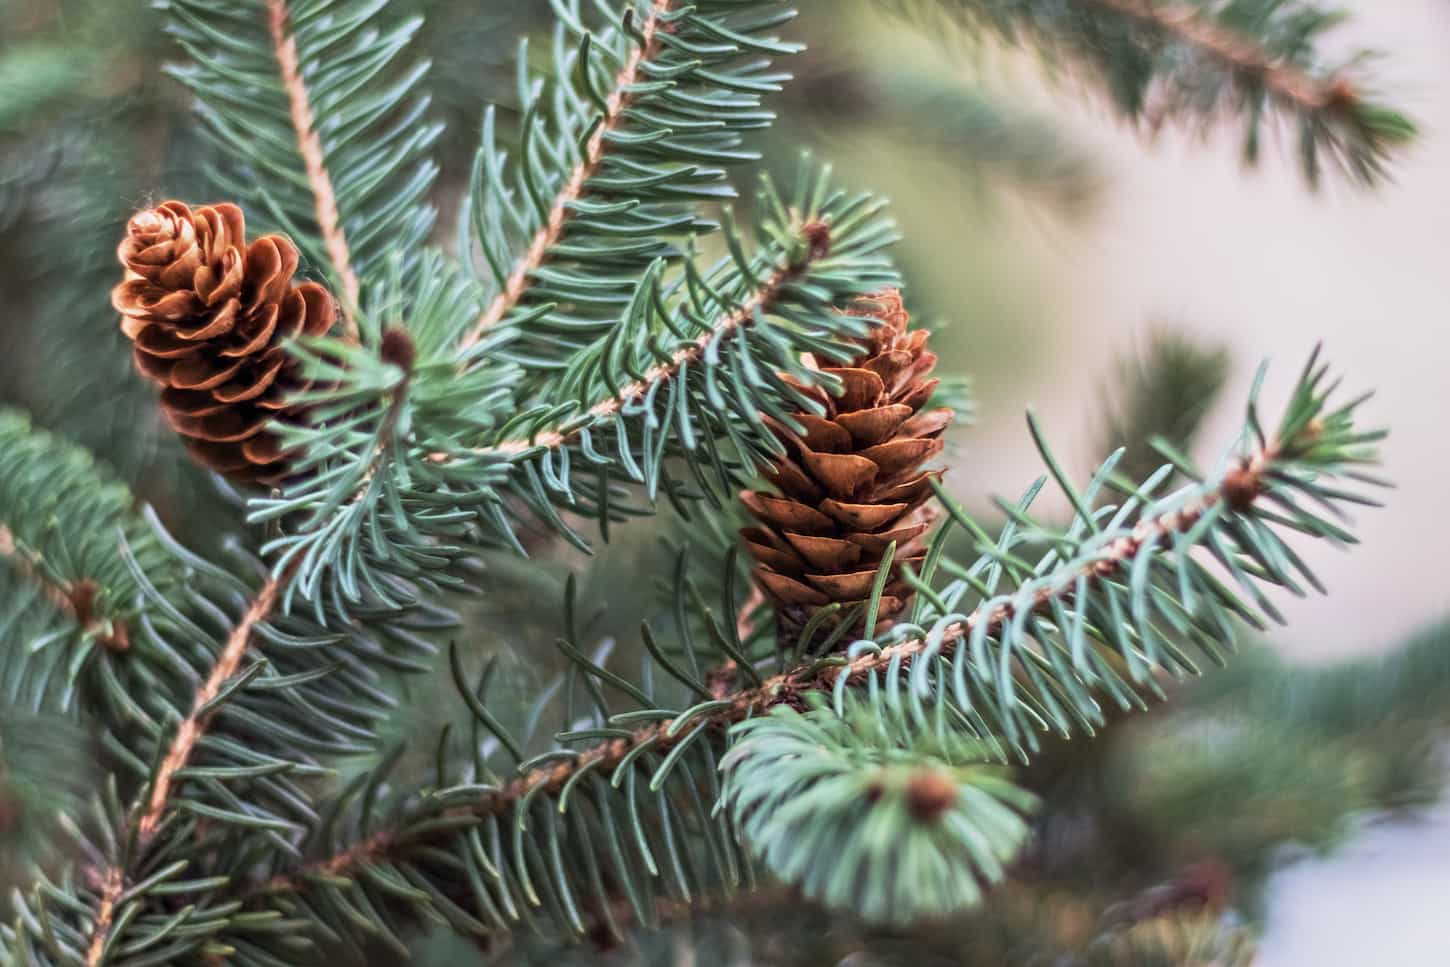 An image of a Blue spruce branch with cones.